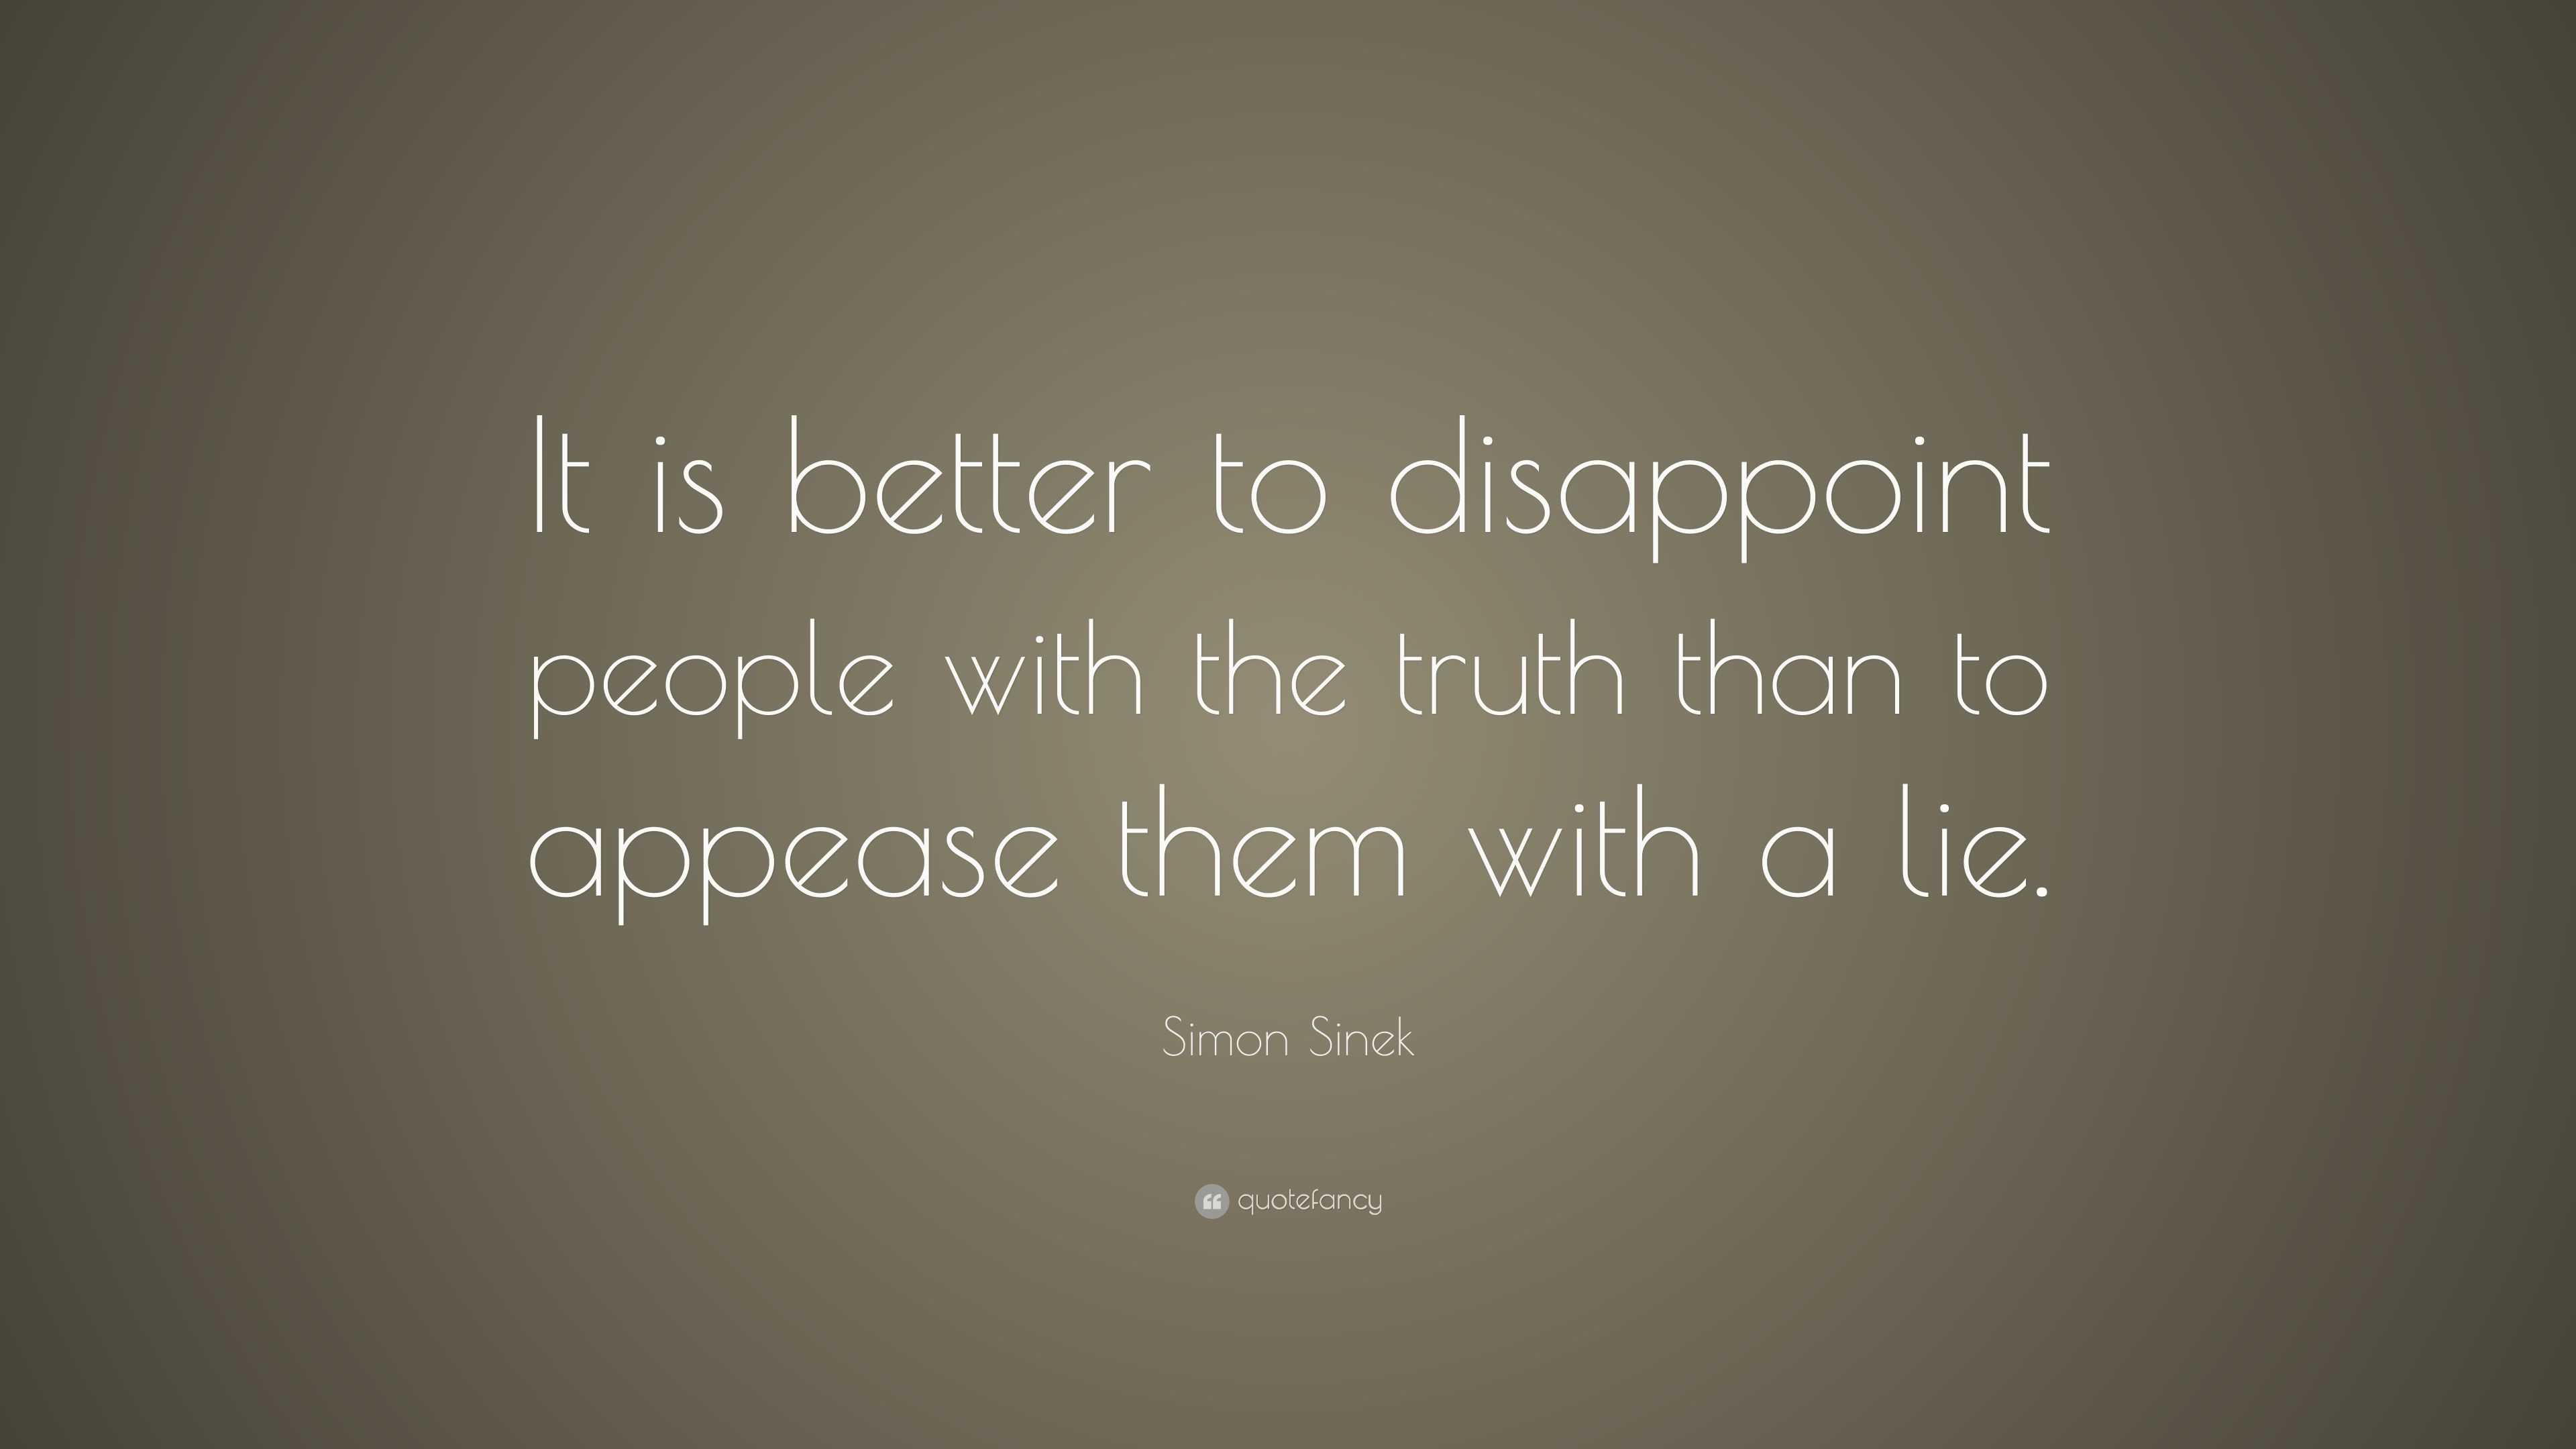 Simon Sinek Quote: “It is better to disappoint people with the truth ...